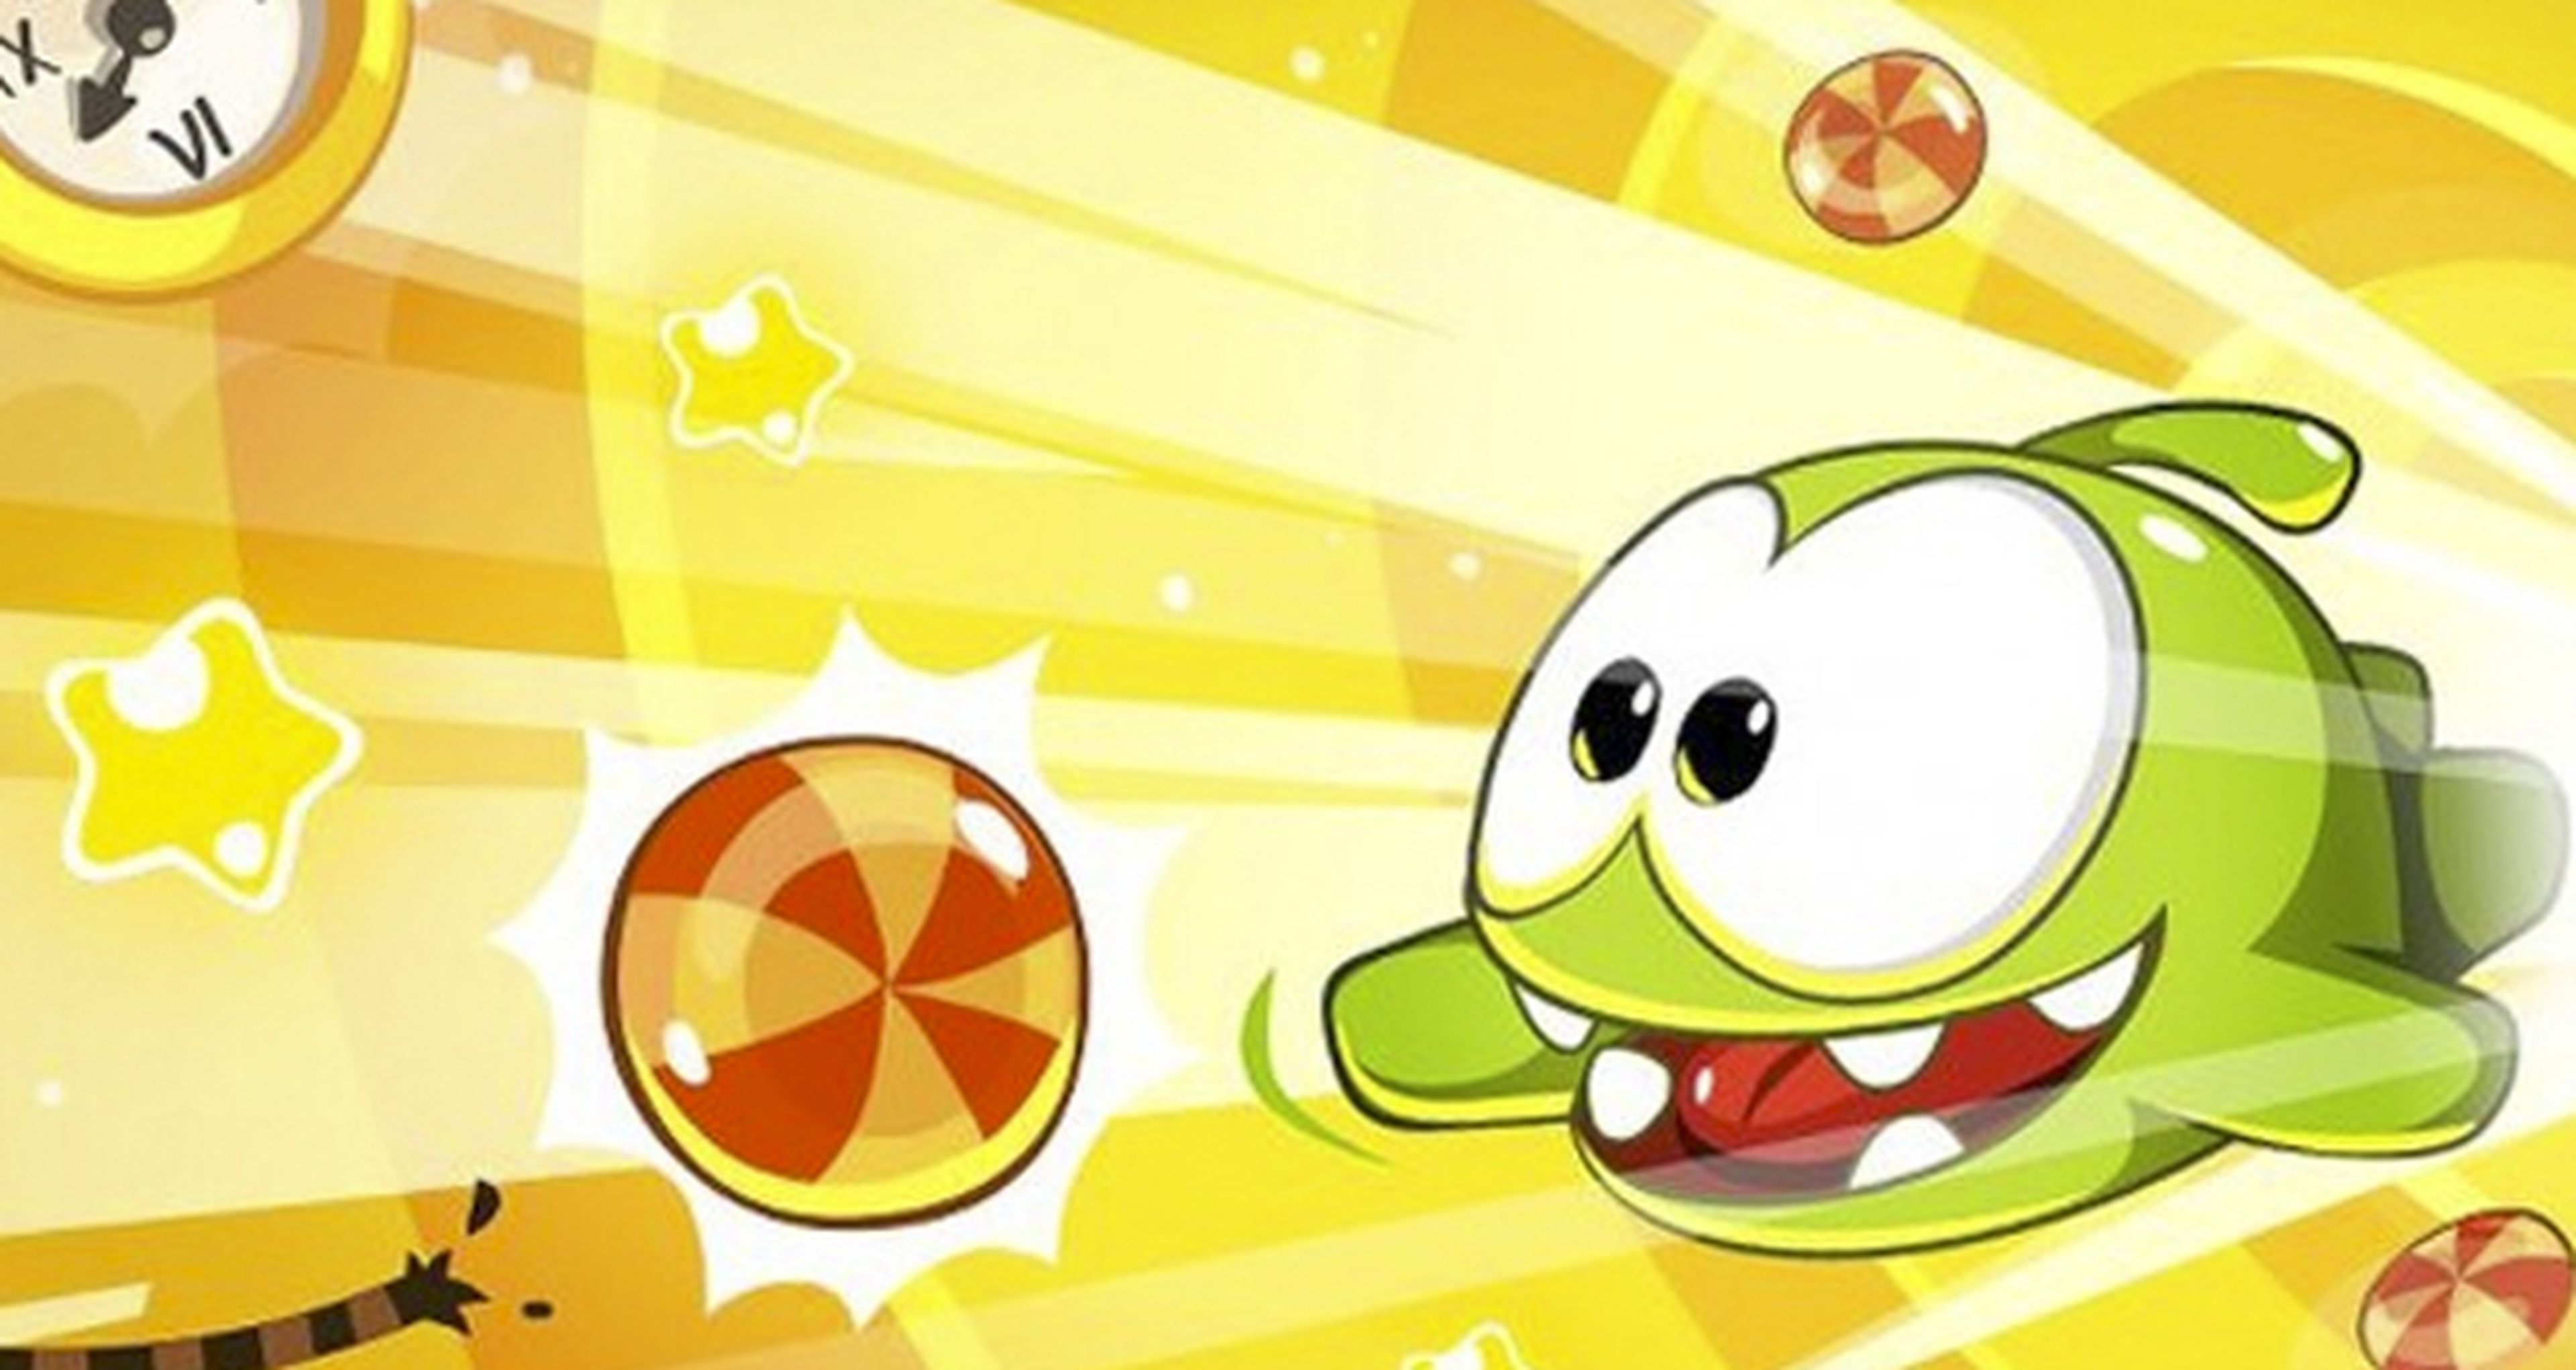 Cut The Rope' Movie Coming In 2016